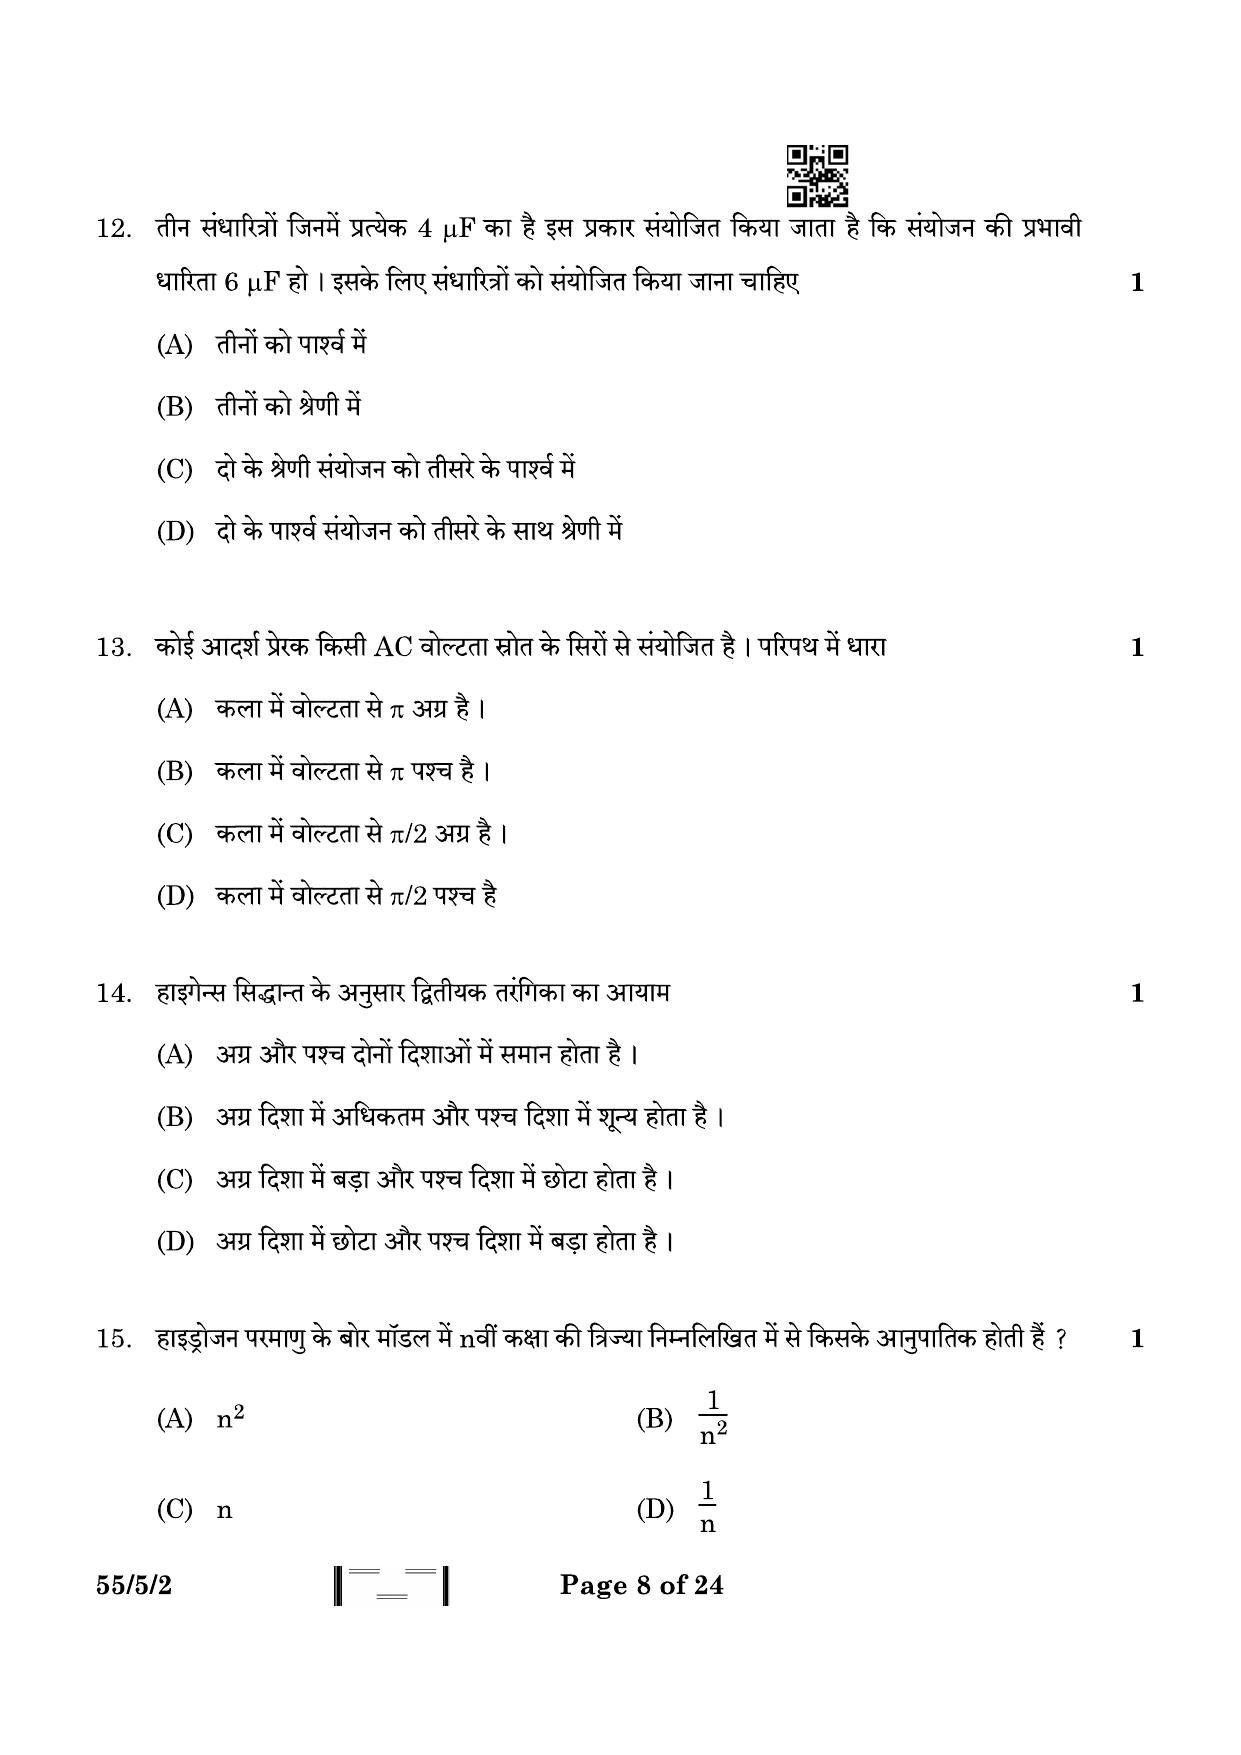 CBSE Class 12 55-5-2 Physics 2023 Question Paper - Page 8